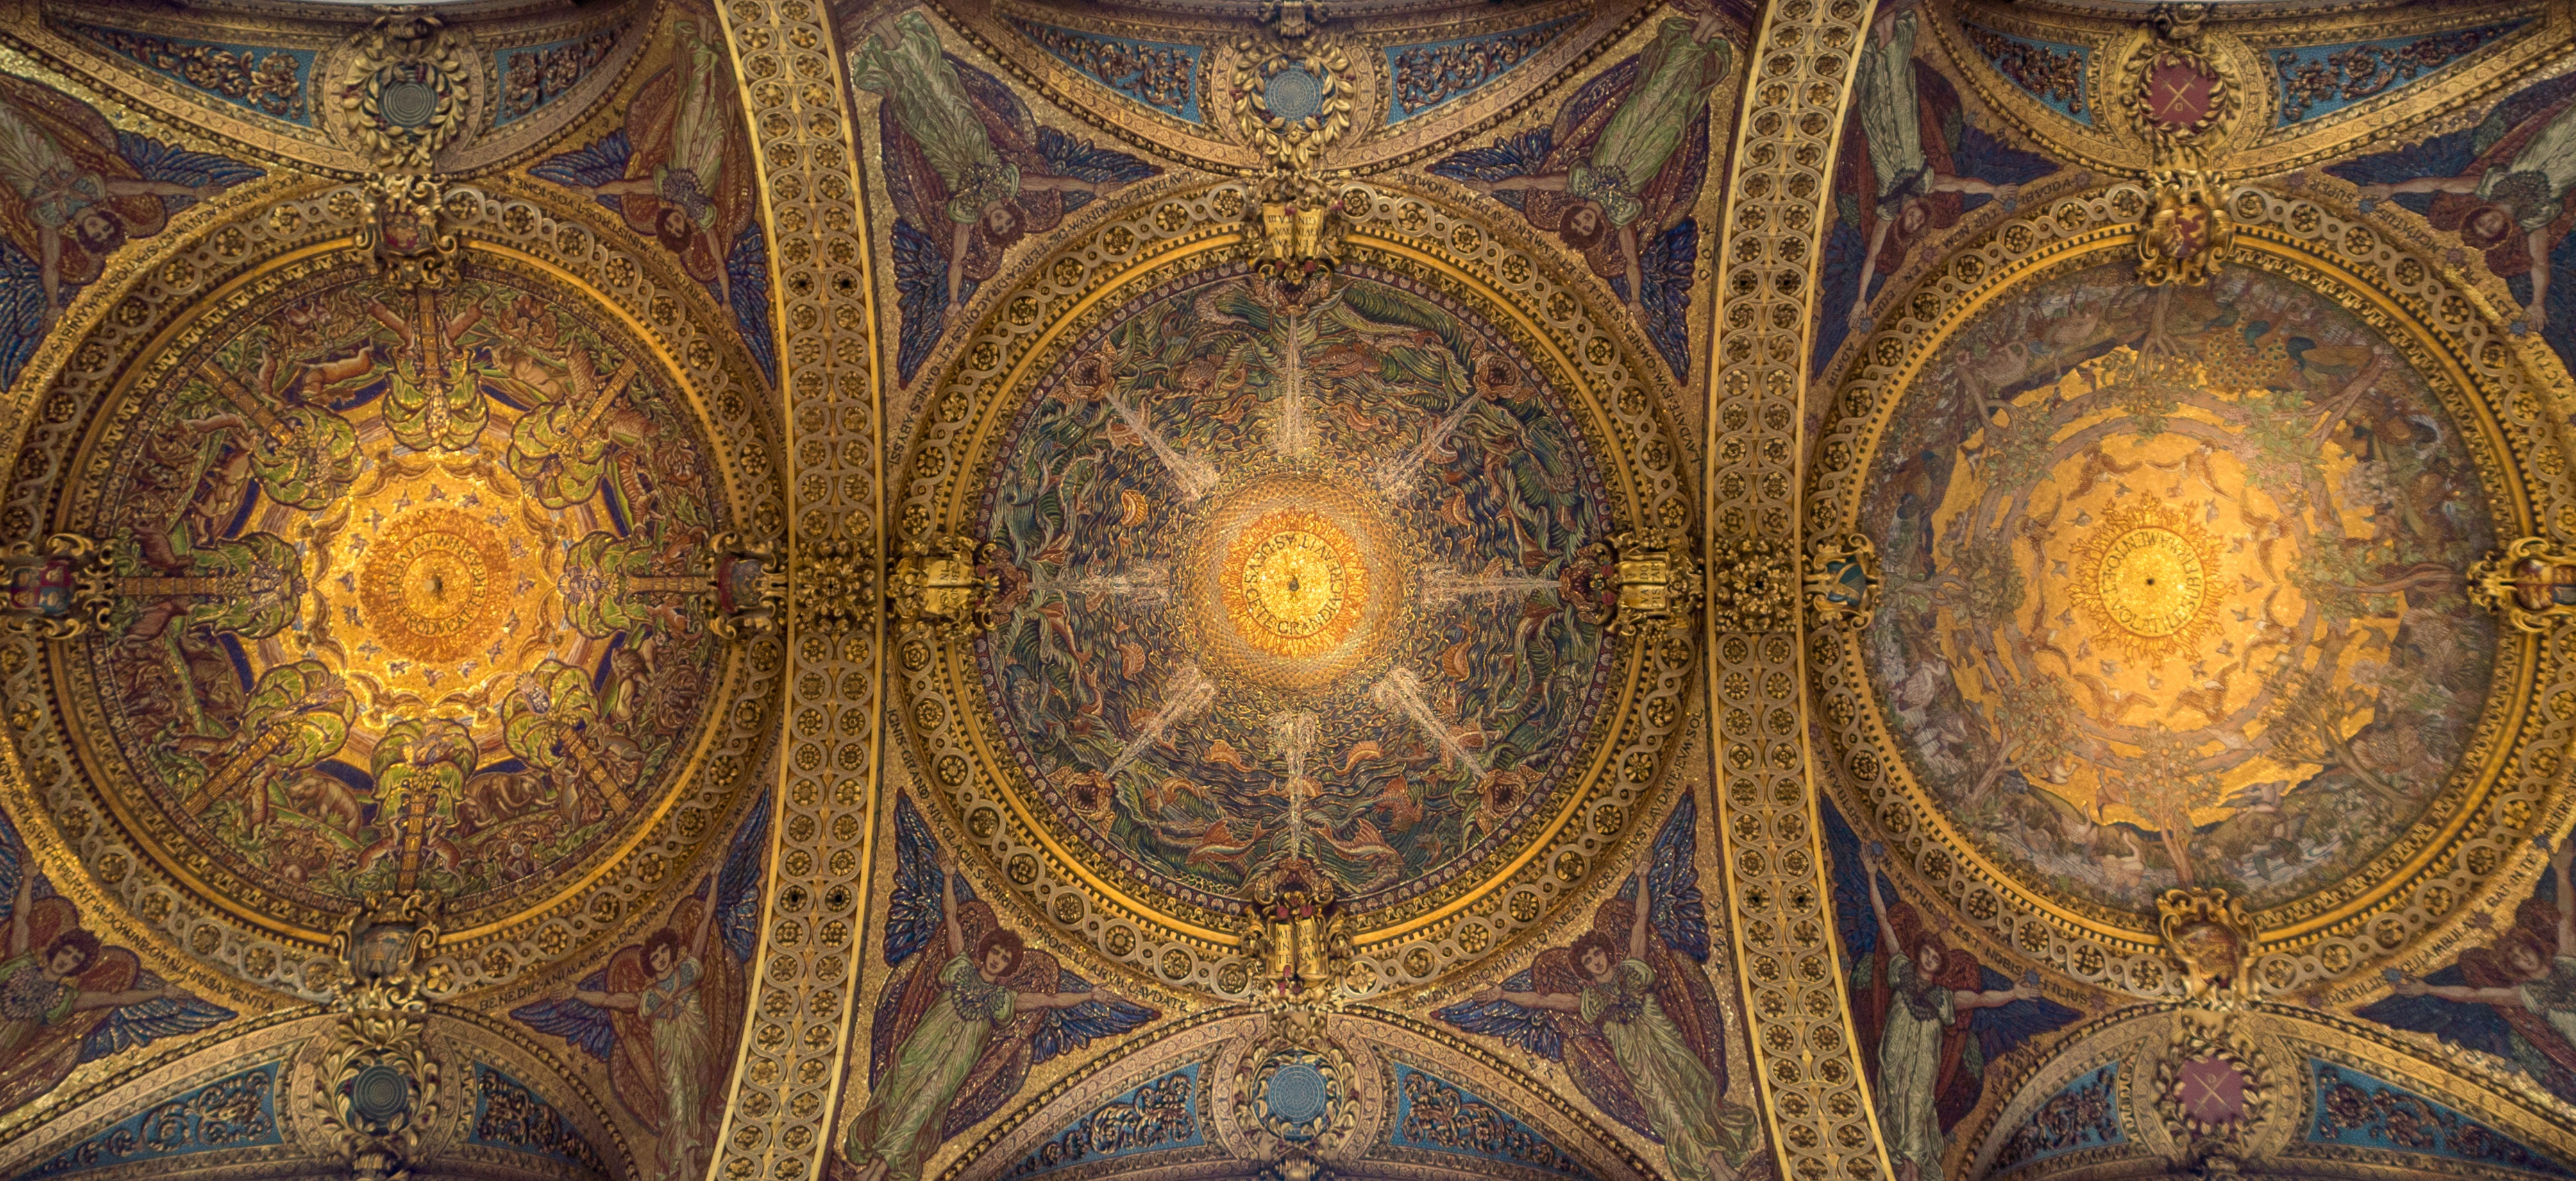 A photograph of the mosaics in the ceiling at the cathedral